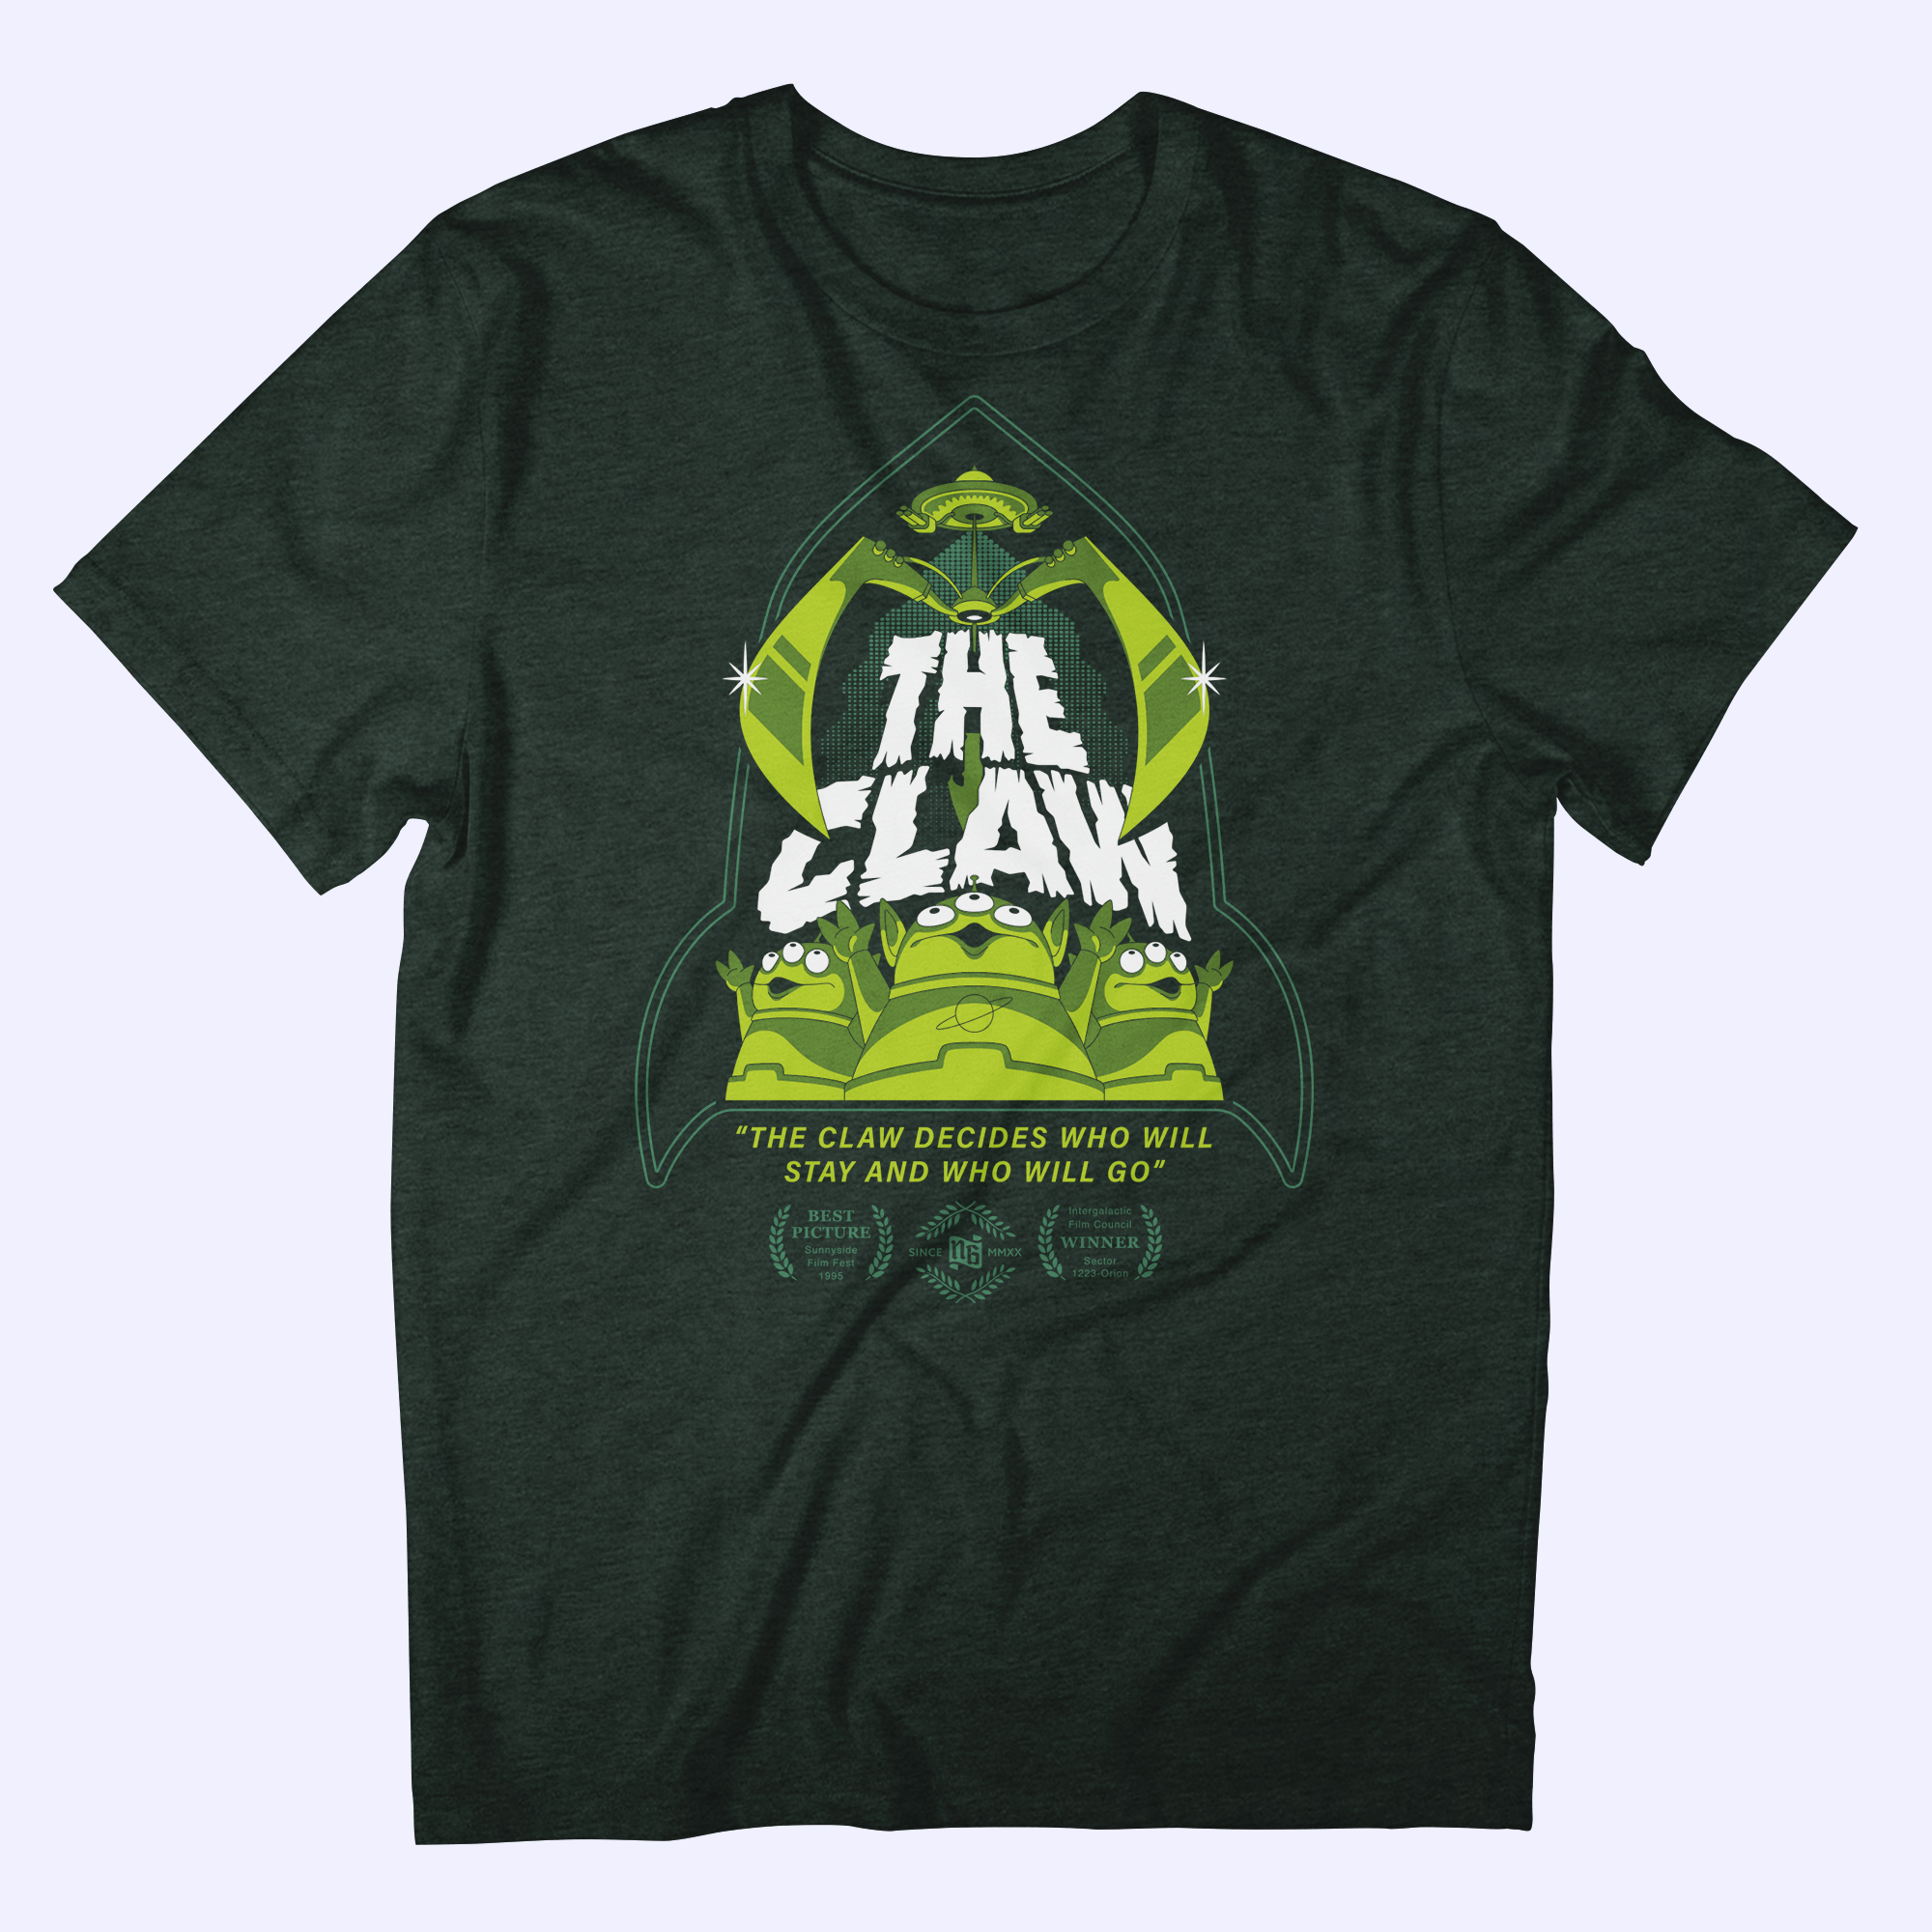 The Claw Tee